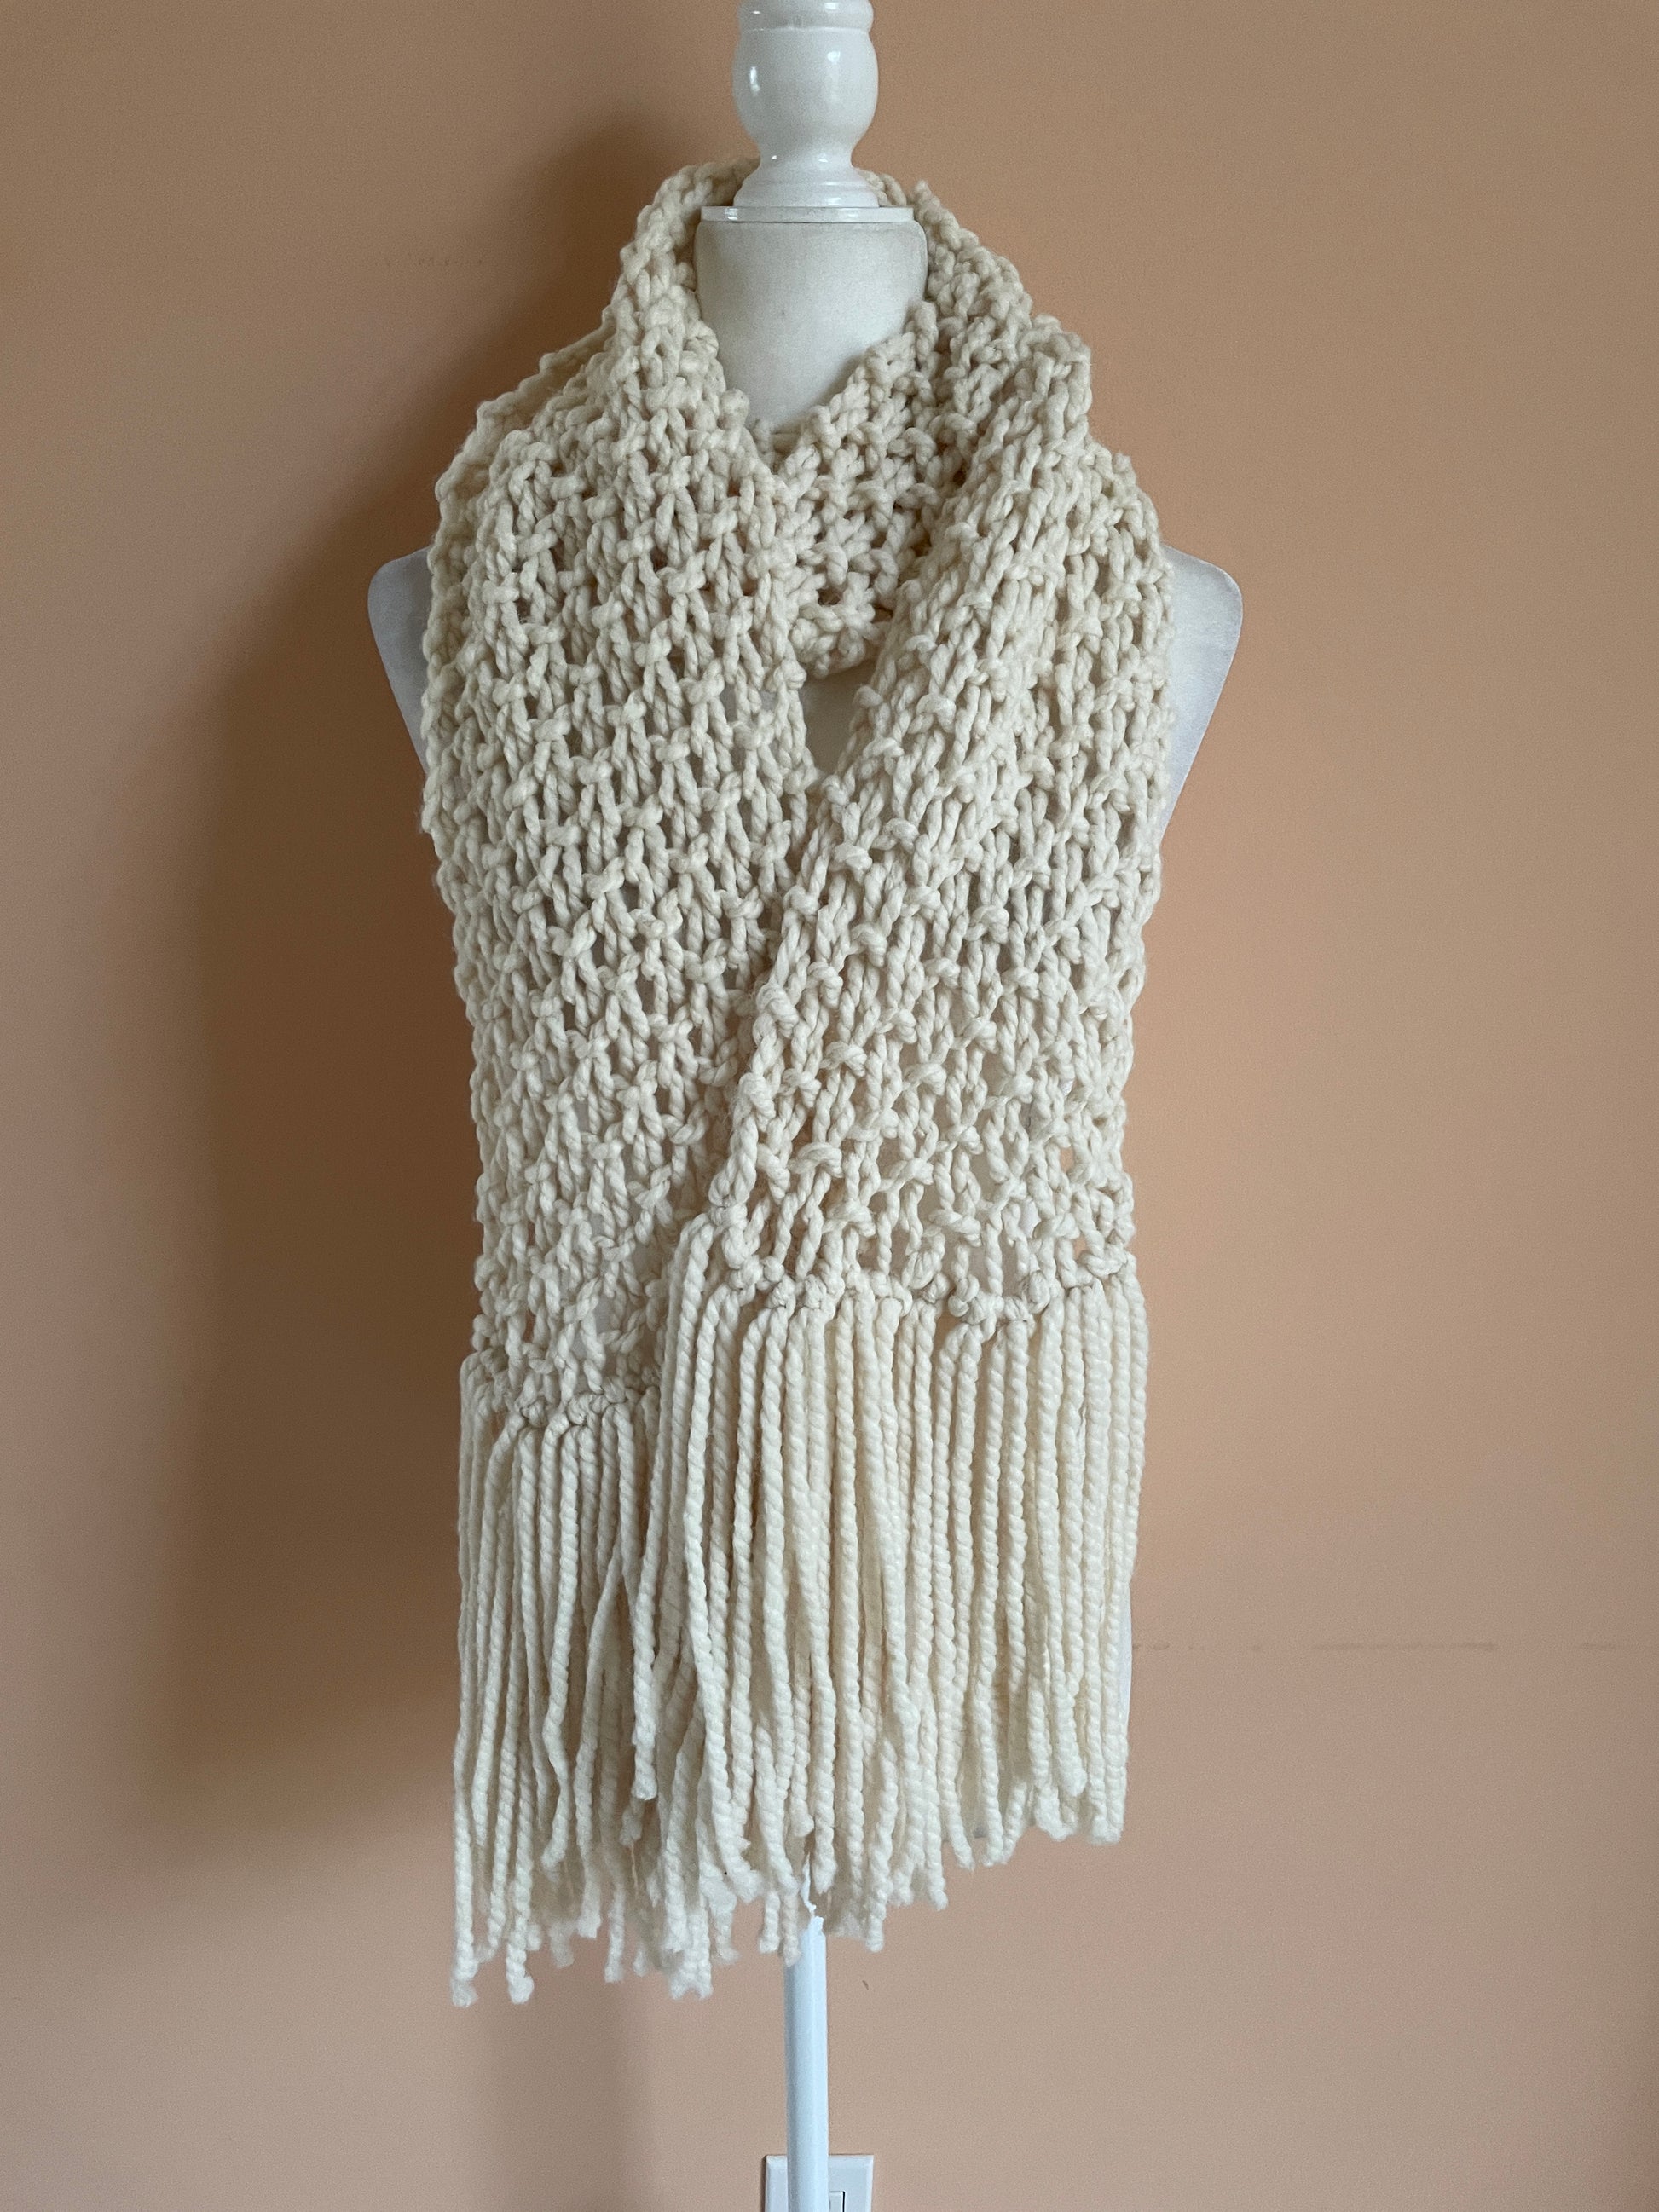 2000s hand knit winter scarf 2000s It’s Chilly Hand Knit White Fringed Winter Scarf